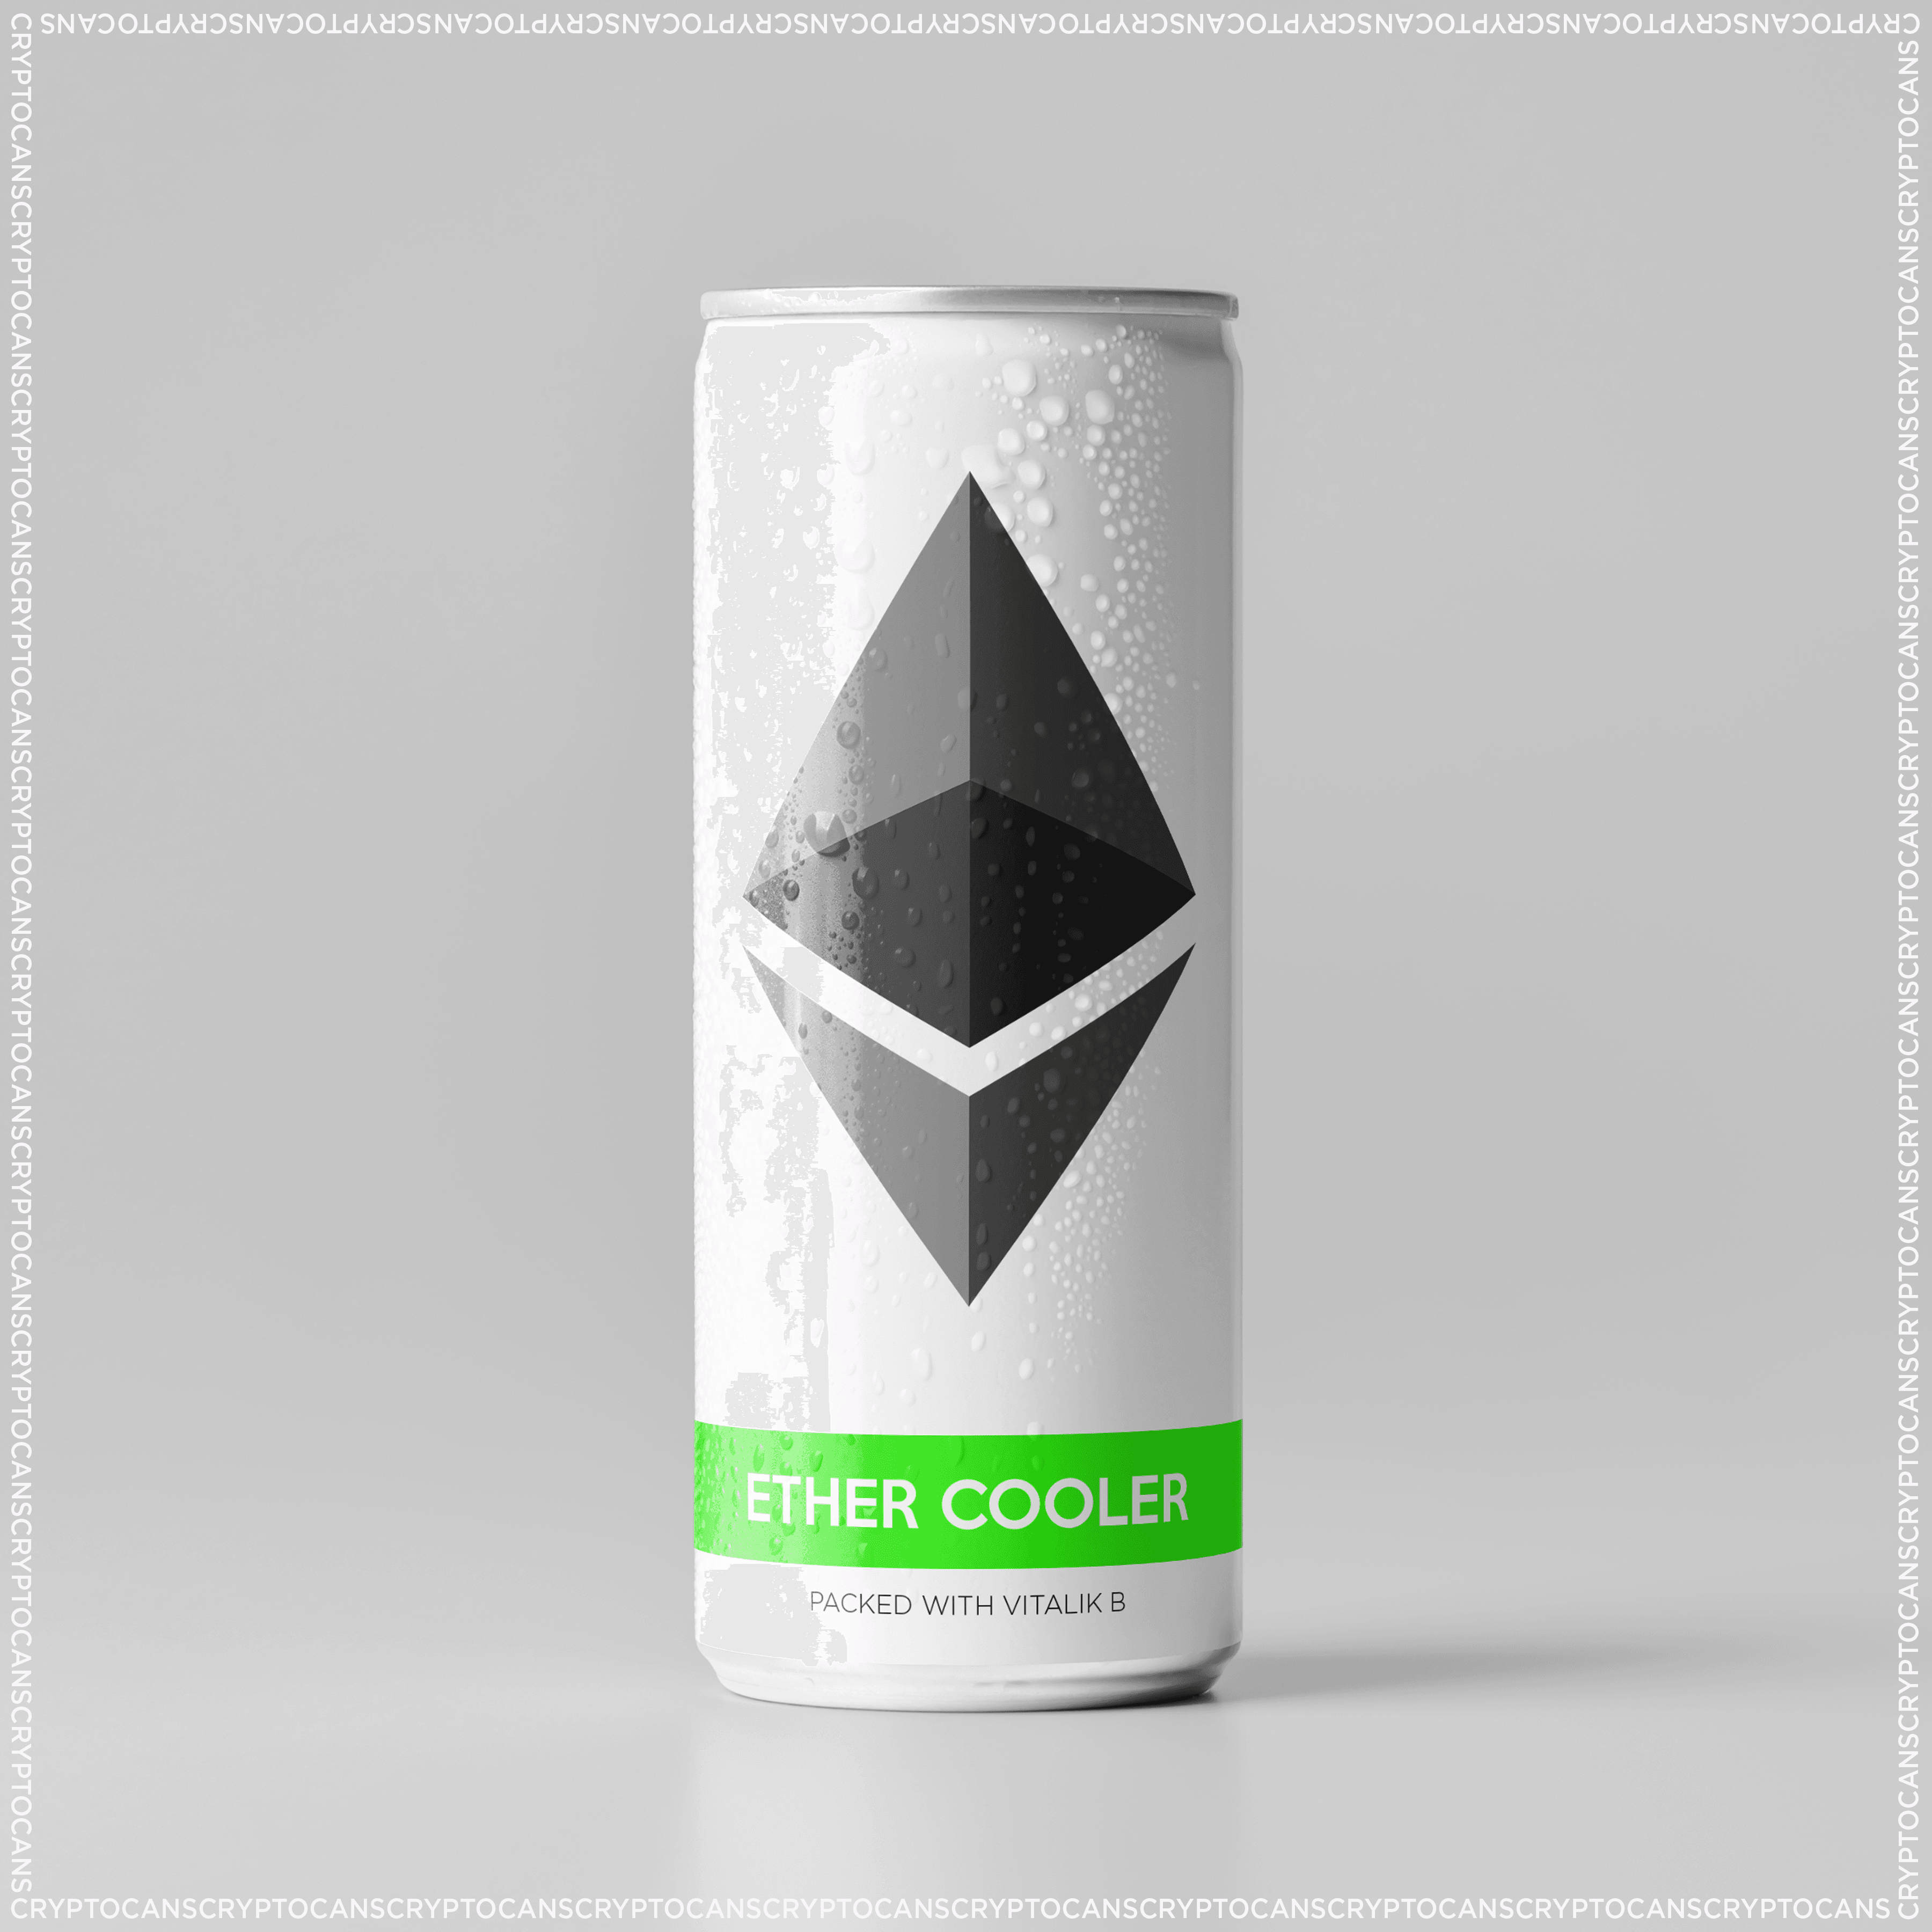 Ether Cooler Cryptocans